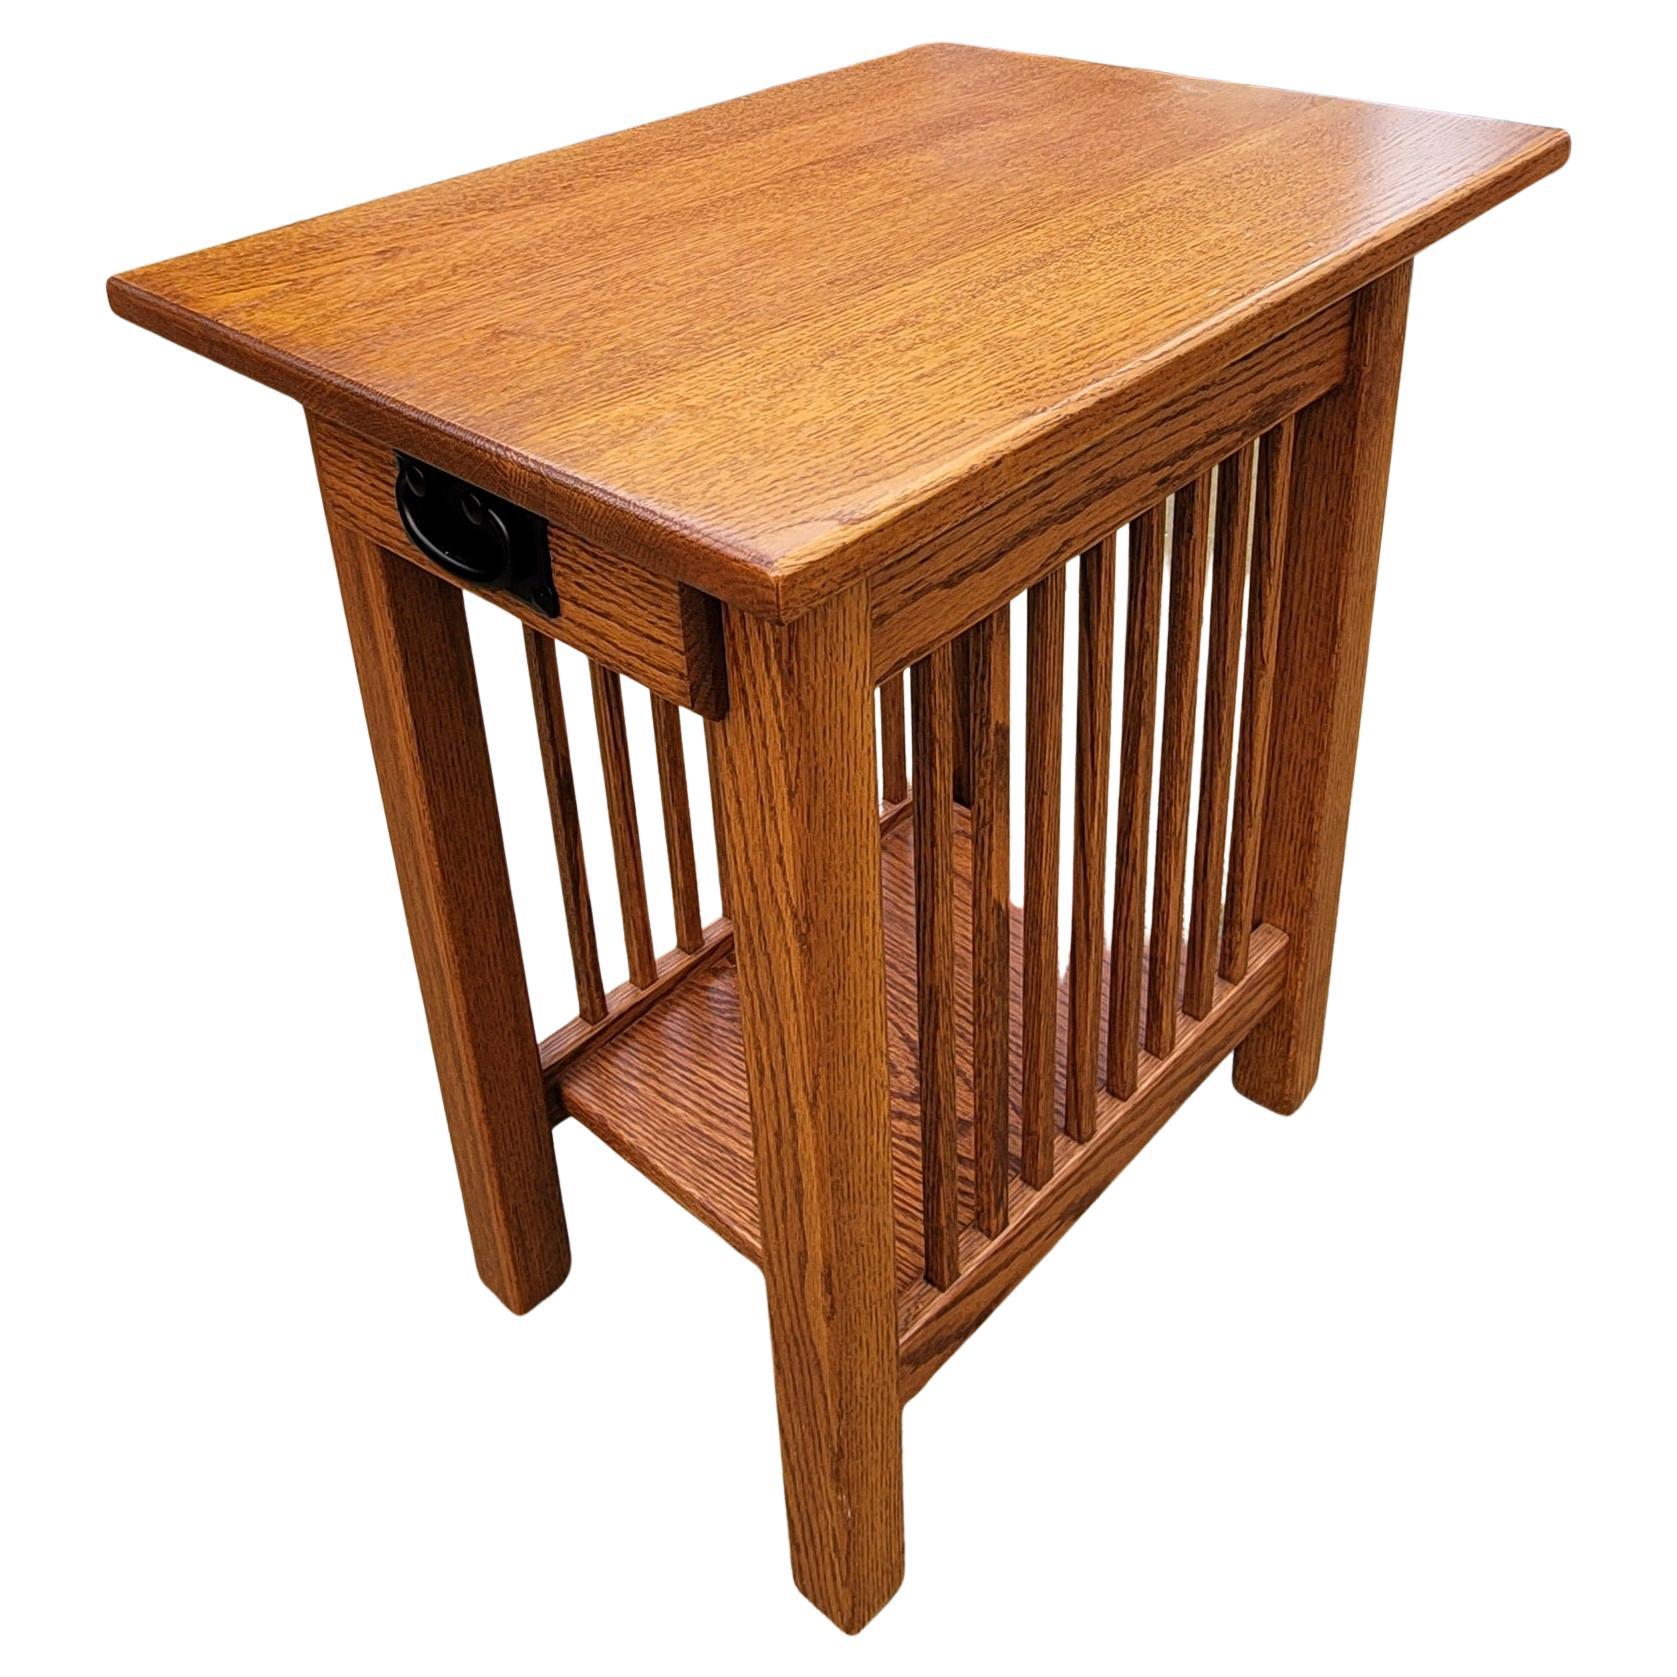 Arrts & Crafts Quarter-Sawn oak side table in great condition, measring 16